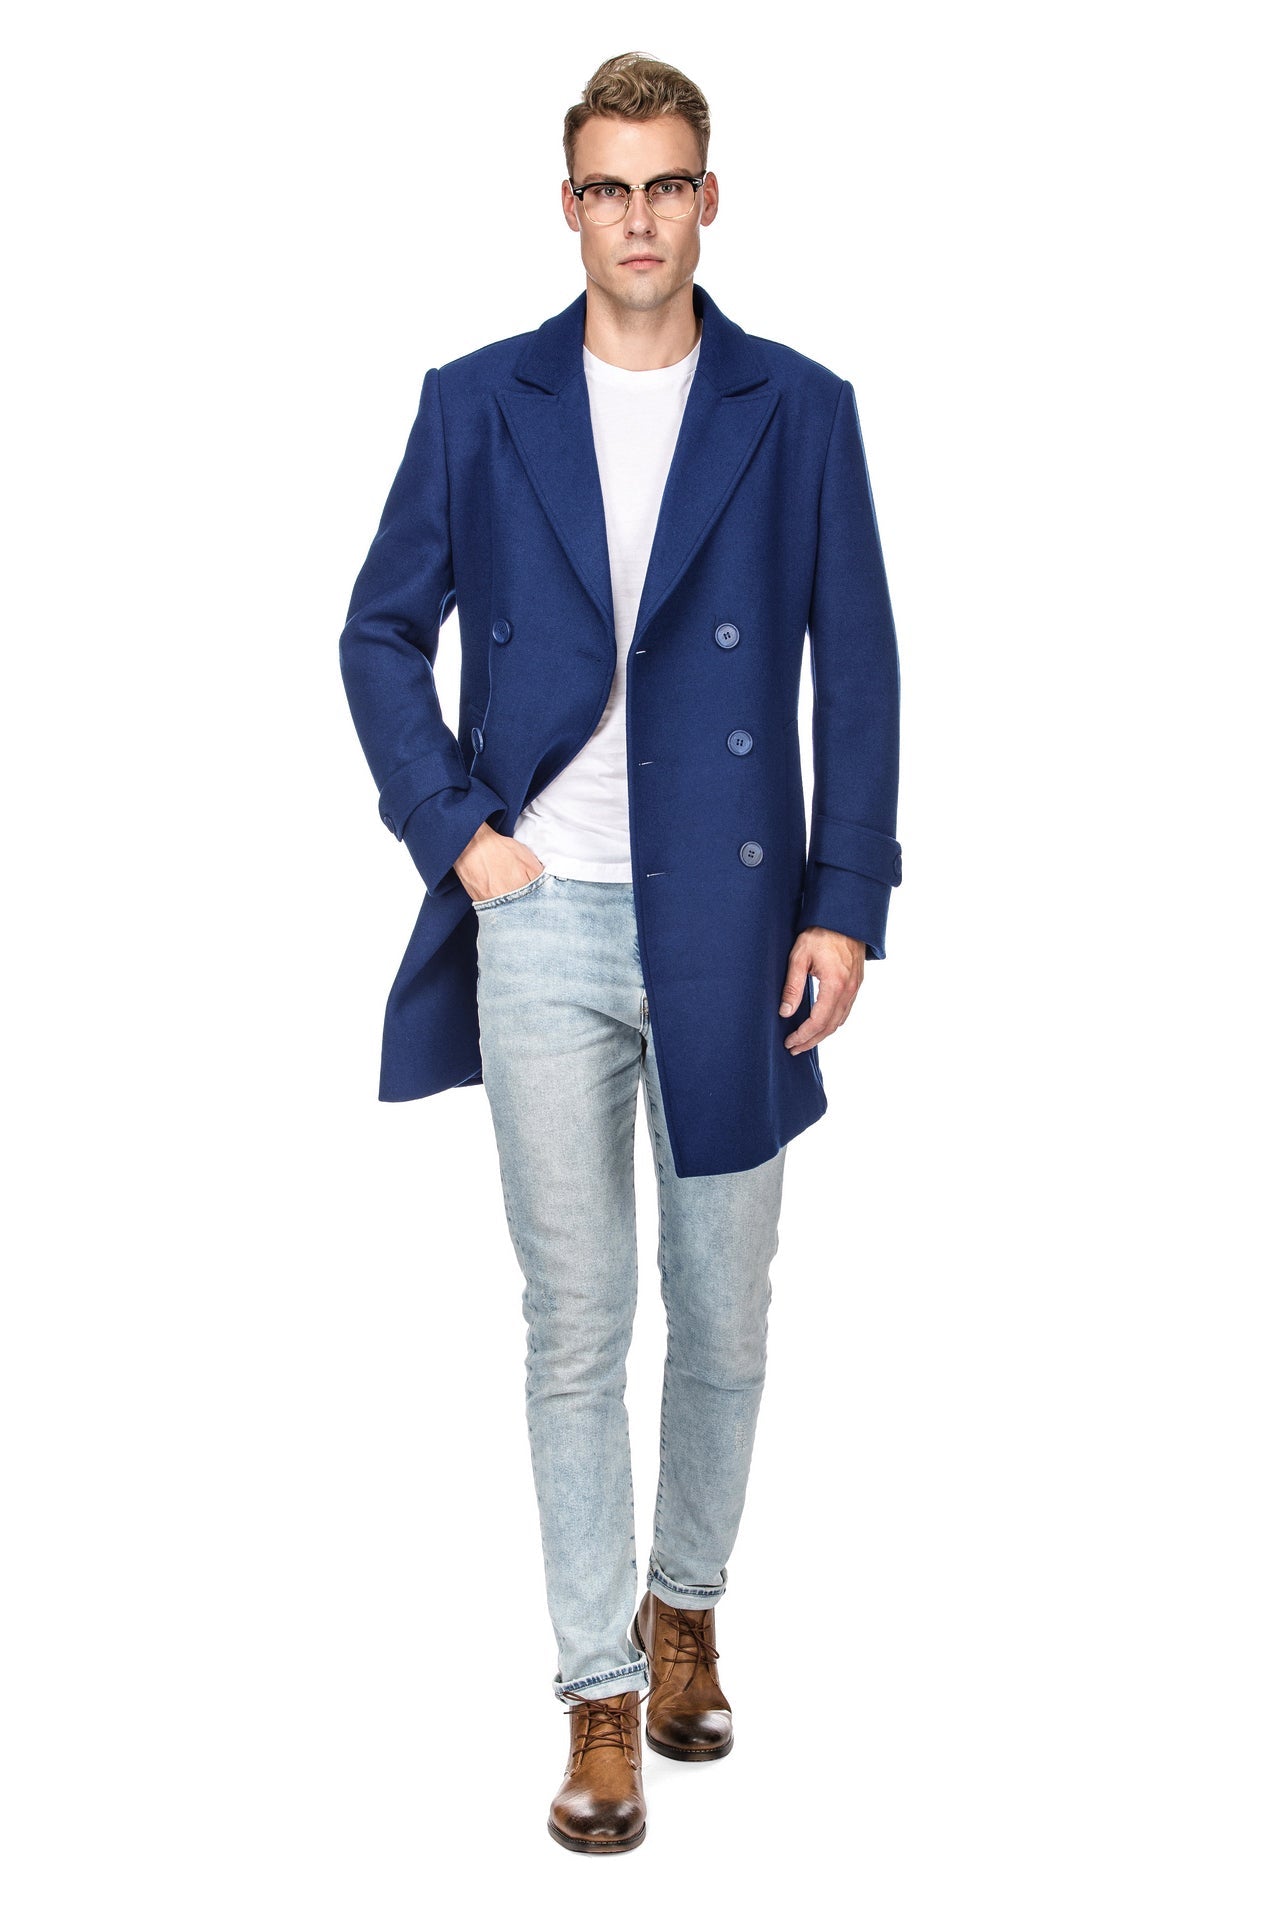 Jackets & Coats  Wool Blend Double Breasted Tailored Coat